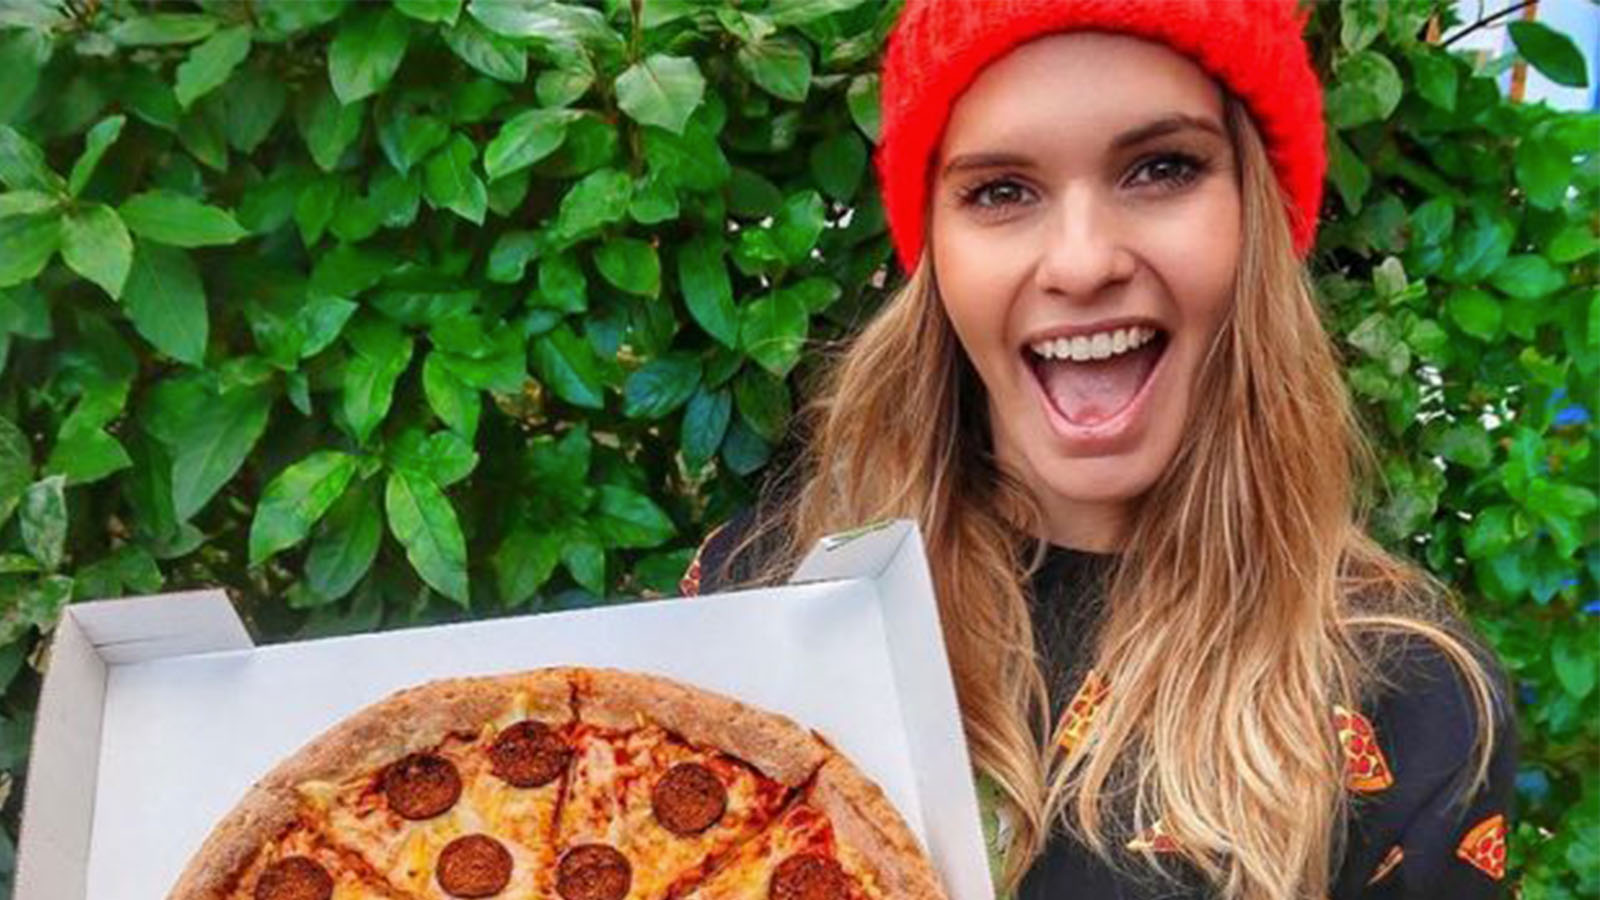 A woman with light brown hair is wearing a red beanie. She is holding up a pizza and smiling.